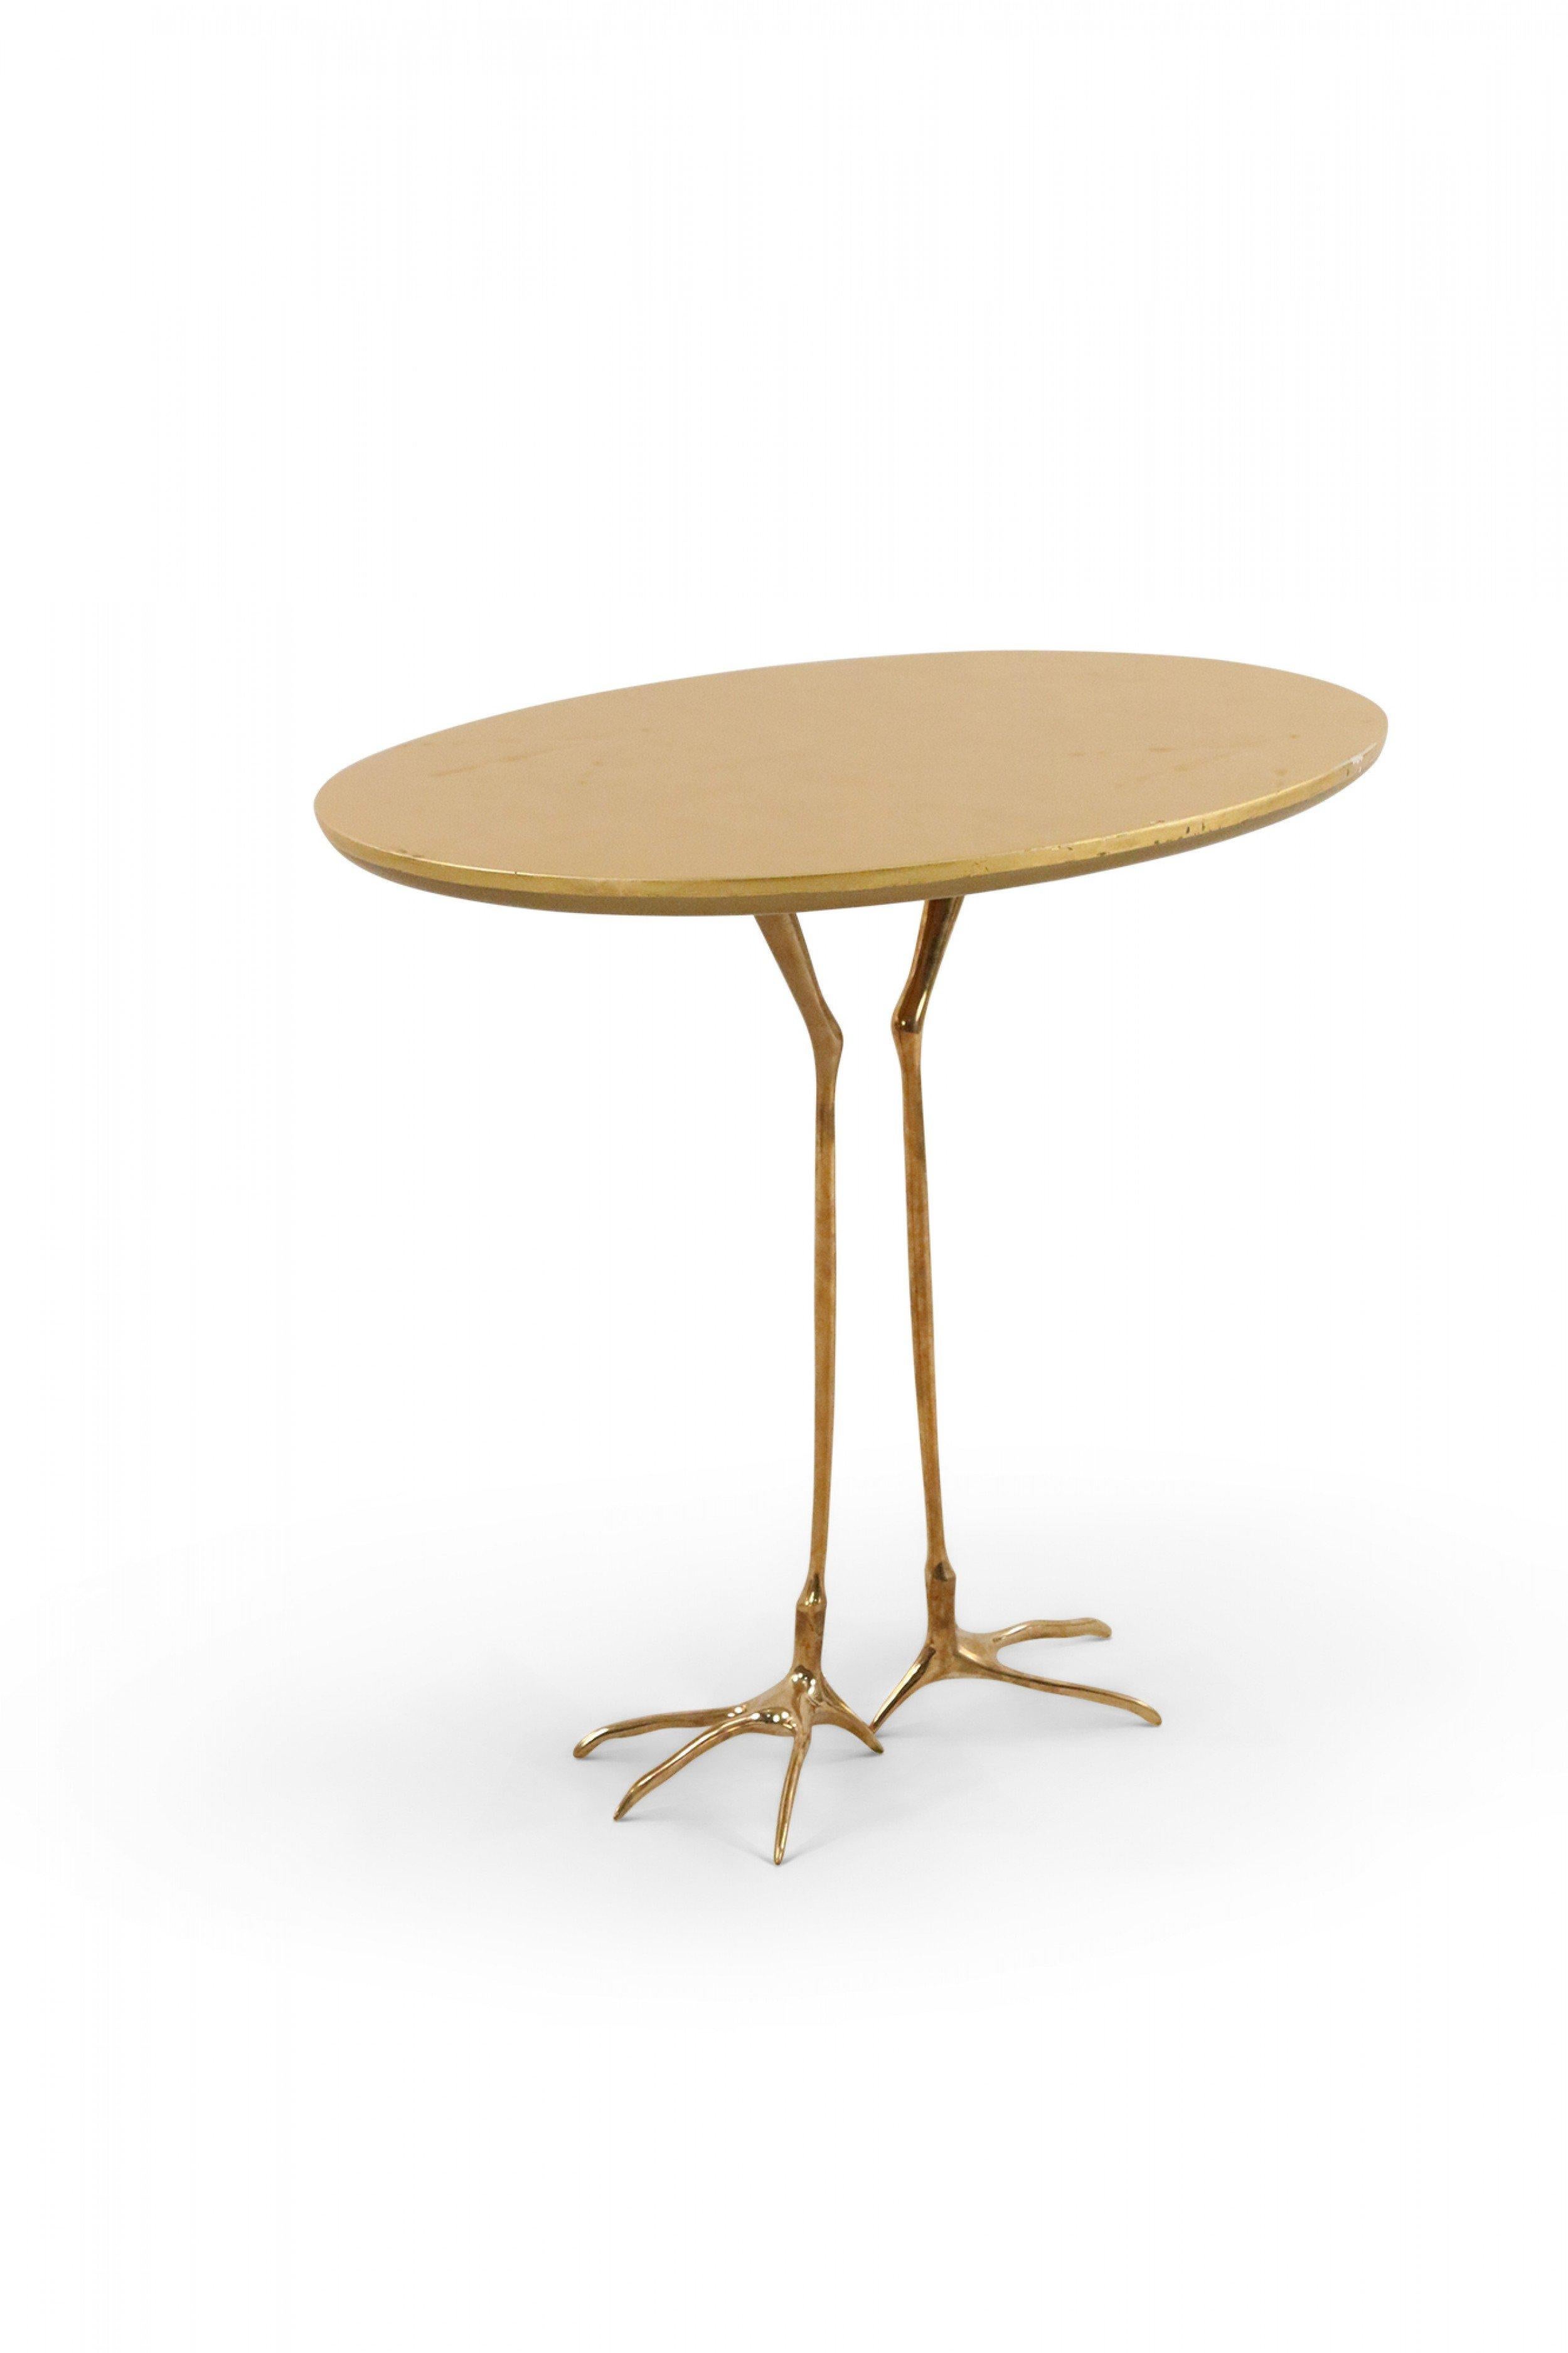 Mid-century gilt metal bird foot end/side table with oval top featuring bird foot-shaped imprints. (MERET OPPENHEIM).
    